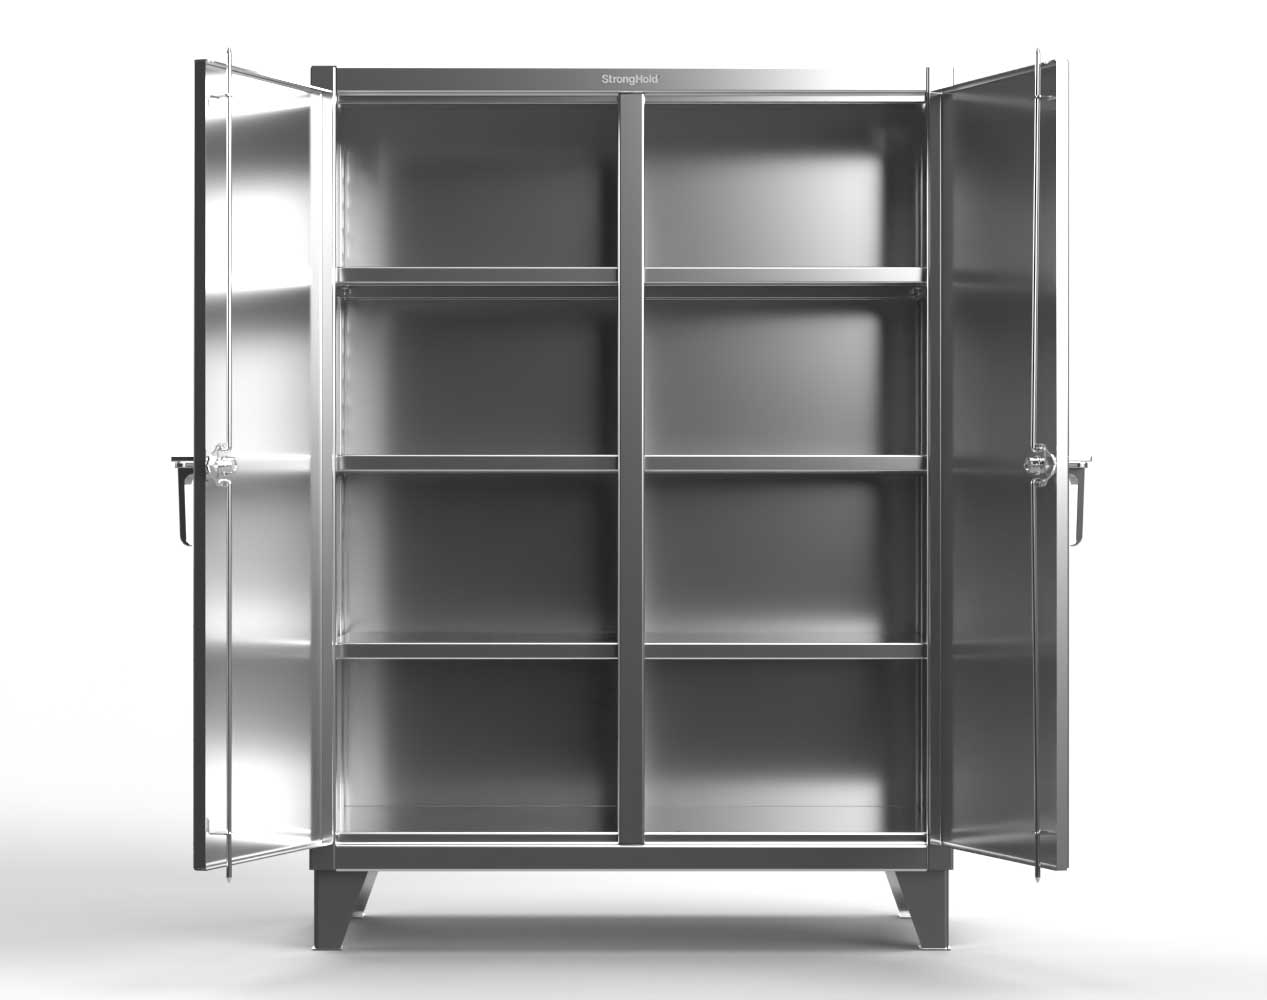 Extreme Duty 12 GA Stainless Steel Double Shift Cabinet with 6 Shelves - 60 In. W x 24 In. D x 66 In. H